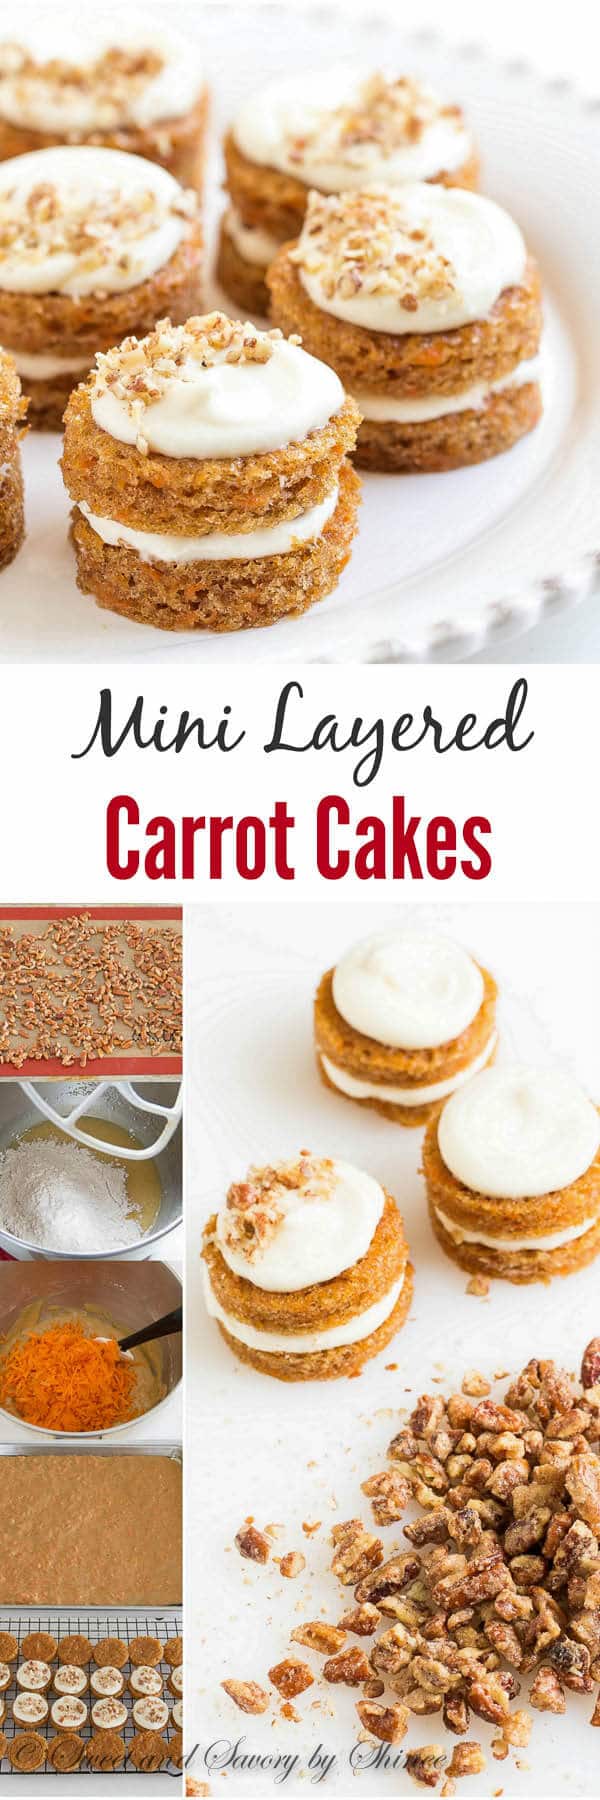 Adorable mini carrot cakes filled with classic cream cheese frosting and studded with crunchy candied pecans! It's the only way to eat carrot cake!